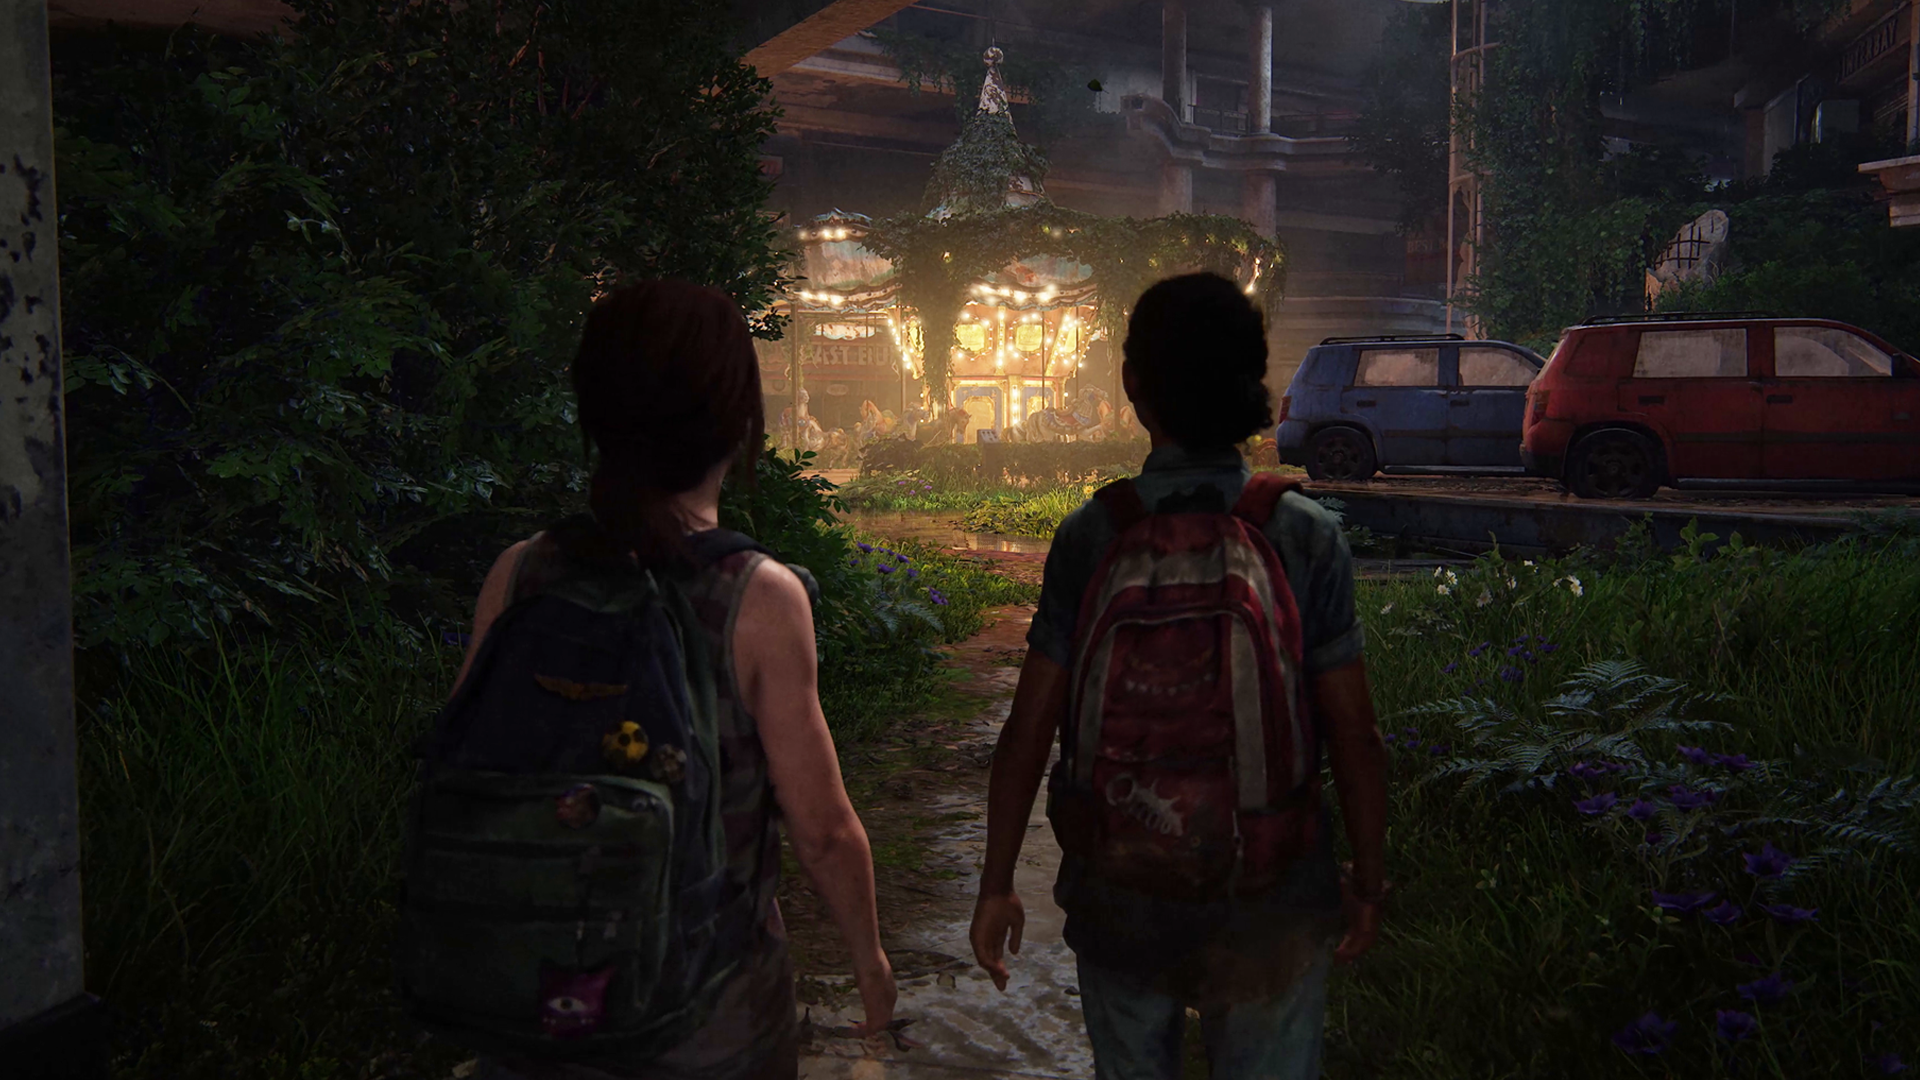 Media asset in full size related to 3dfxzone.it news item entitled as follows: Last of Us Part I su PC: Naughty Dog rivela tecnologie e requisiti di sistema | Image Name: news34253_The-Last-of-Us-Part-I_PC_Edition_2.png